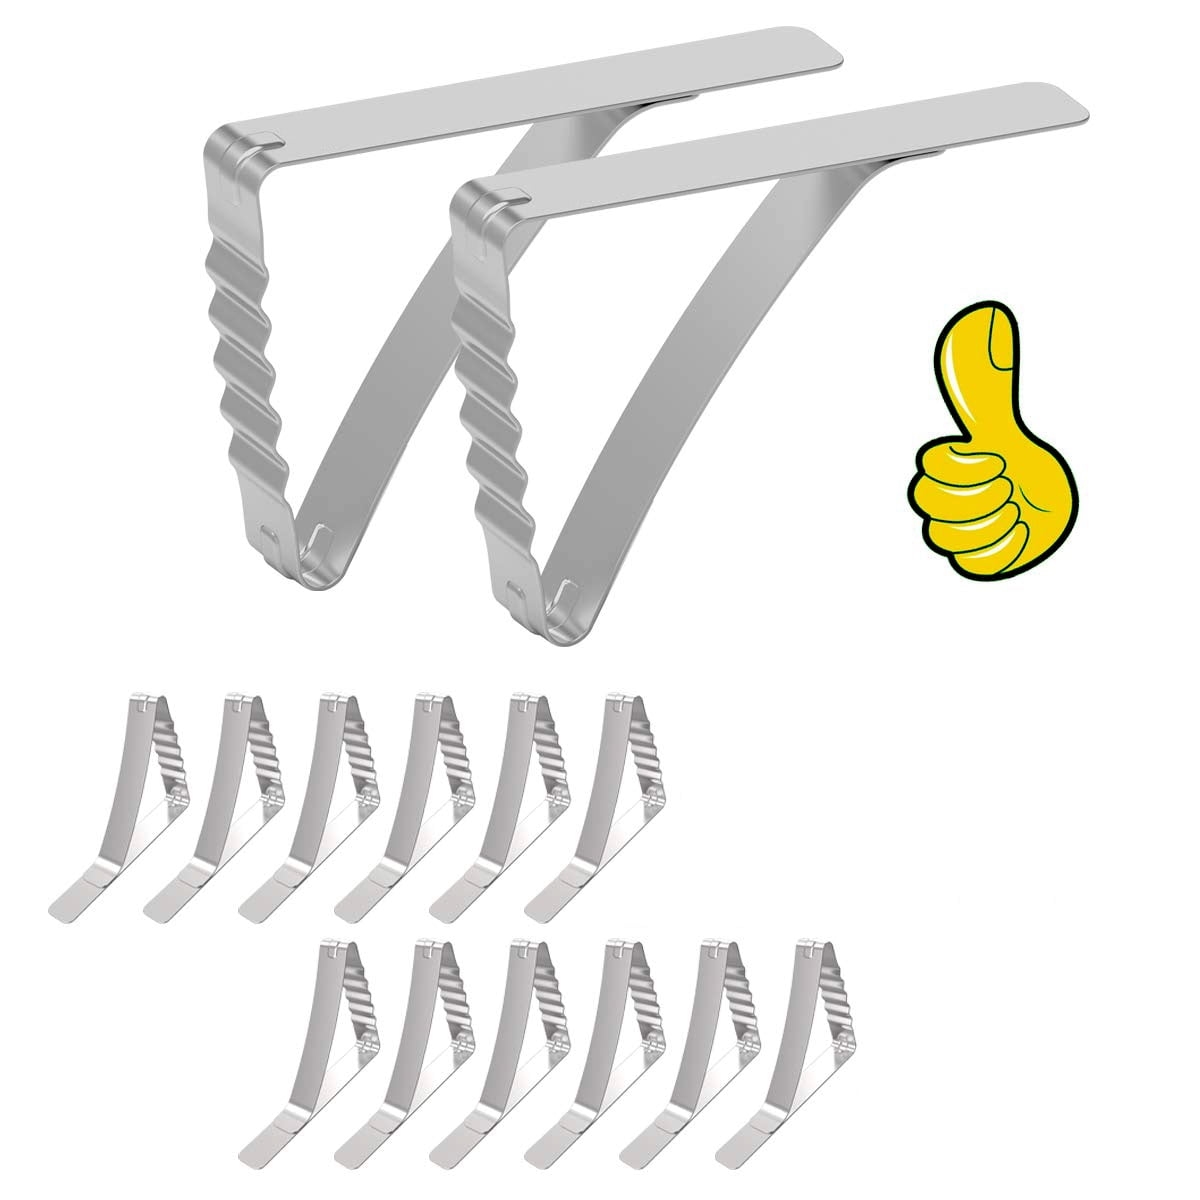 Geria 12 Pack Stainless Steel Tablecloth Clips,Picnic Table Clips,Used for Tables Below 3 inches Thick